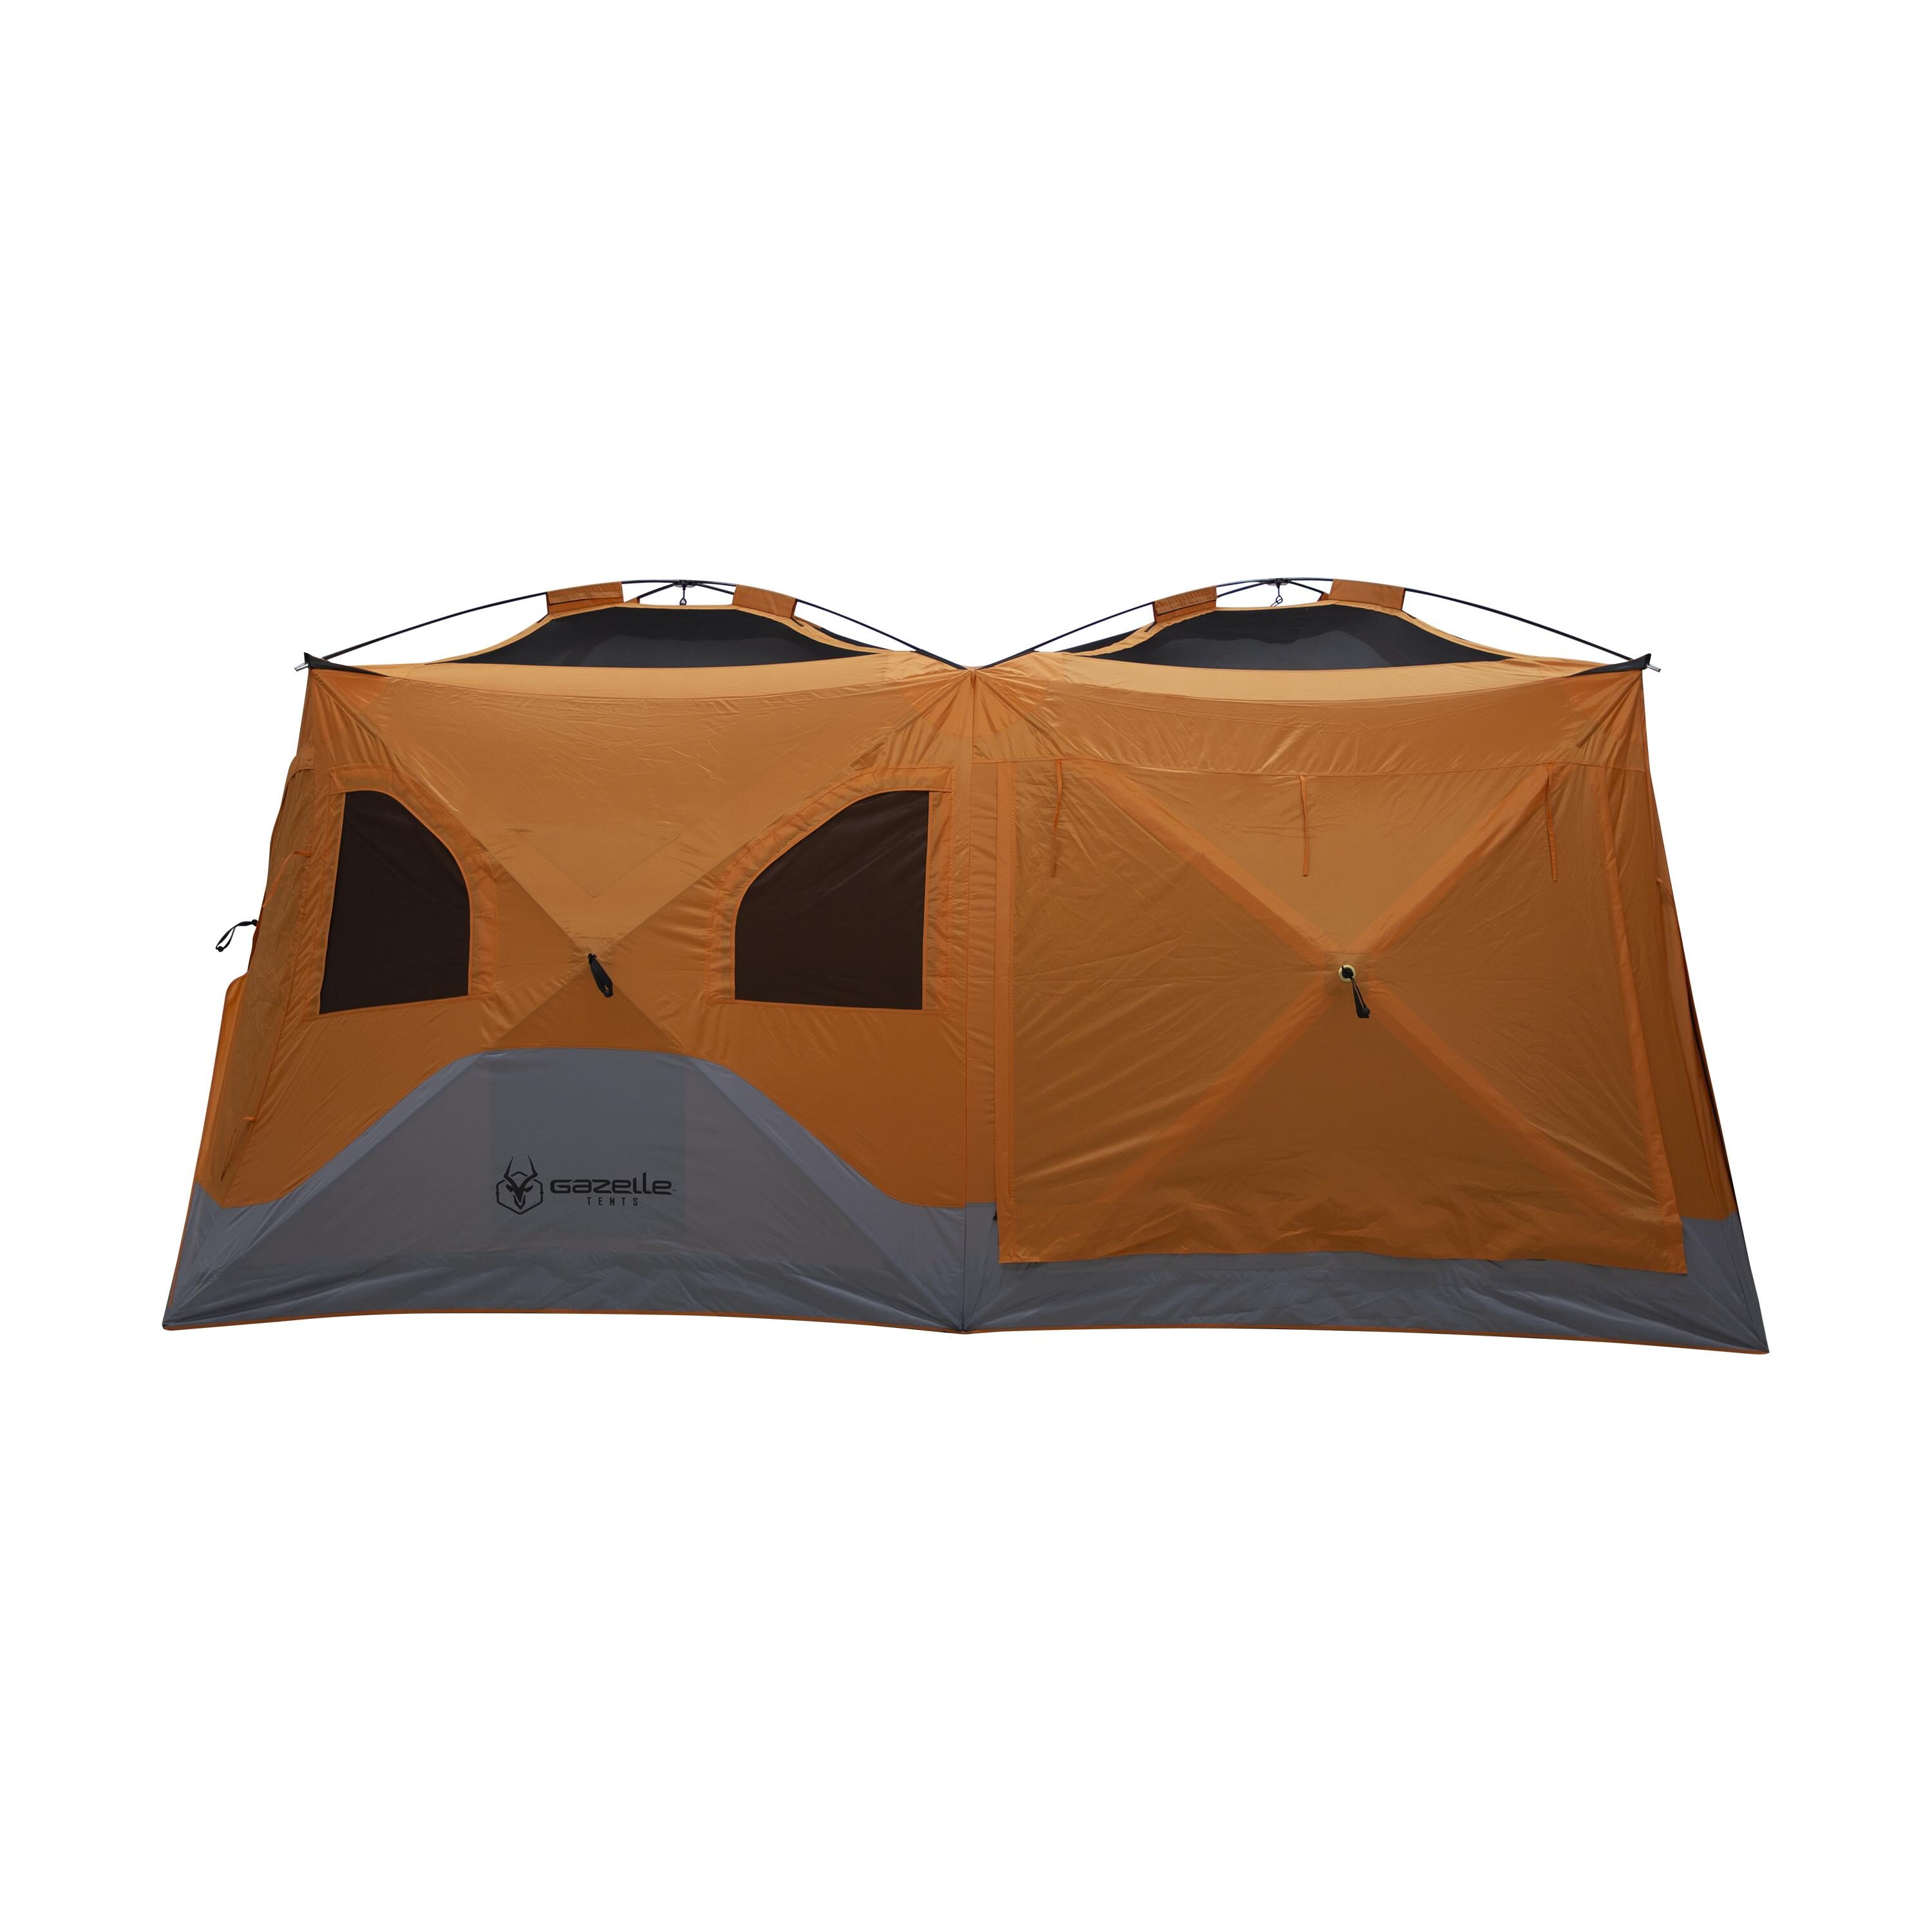 Core 9 ft. x 14 ft. Blue Pop-Up Tent with LED Lights and Instant Setup -  Spacious and Convenient